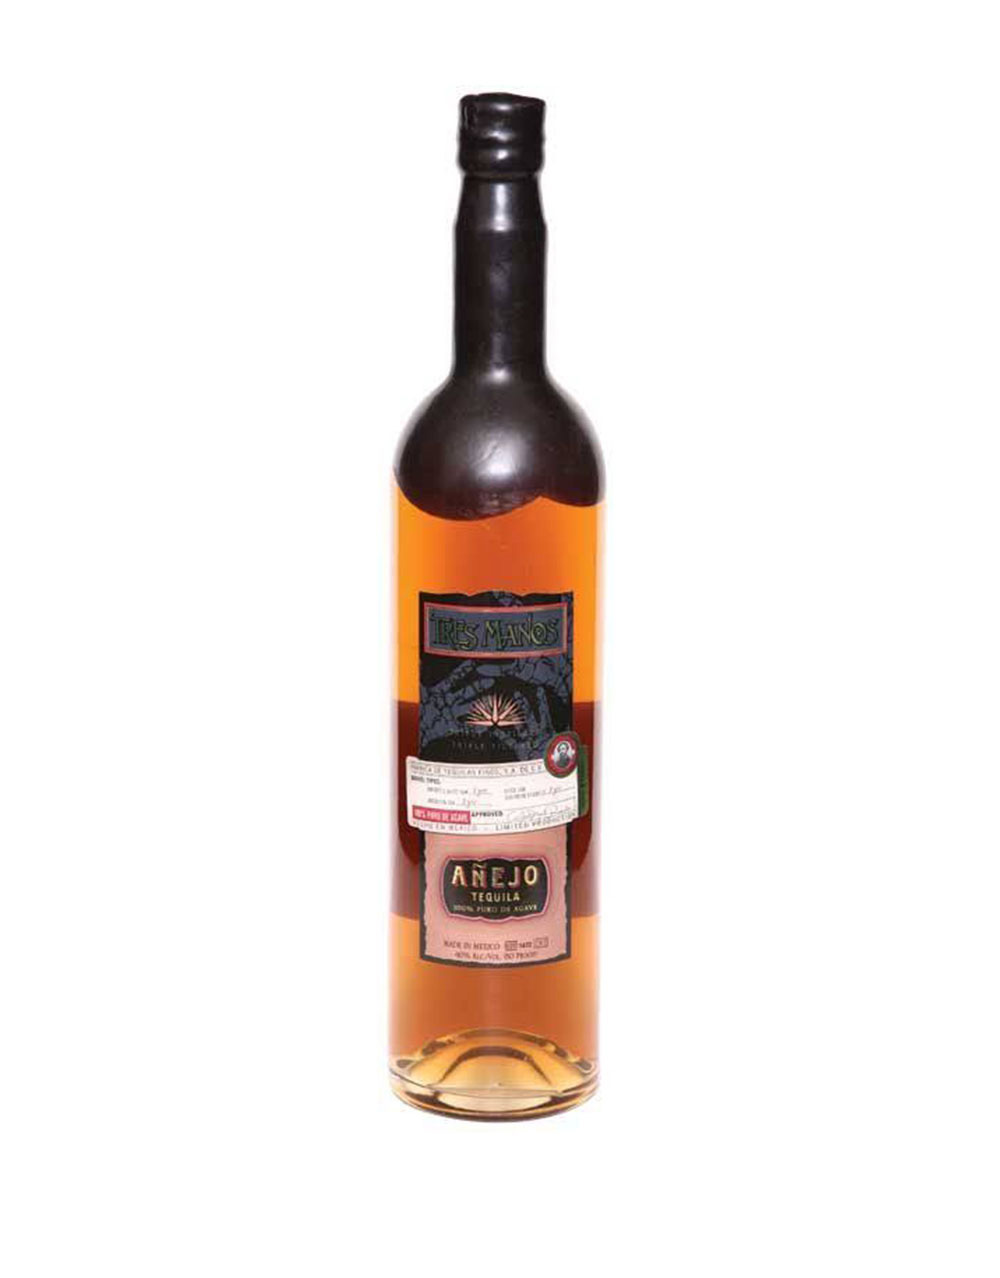 Tres Manos Anejo 3 Year Old Tequila